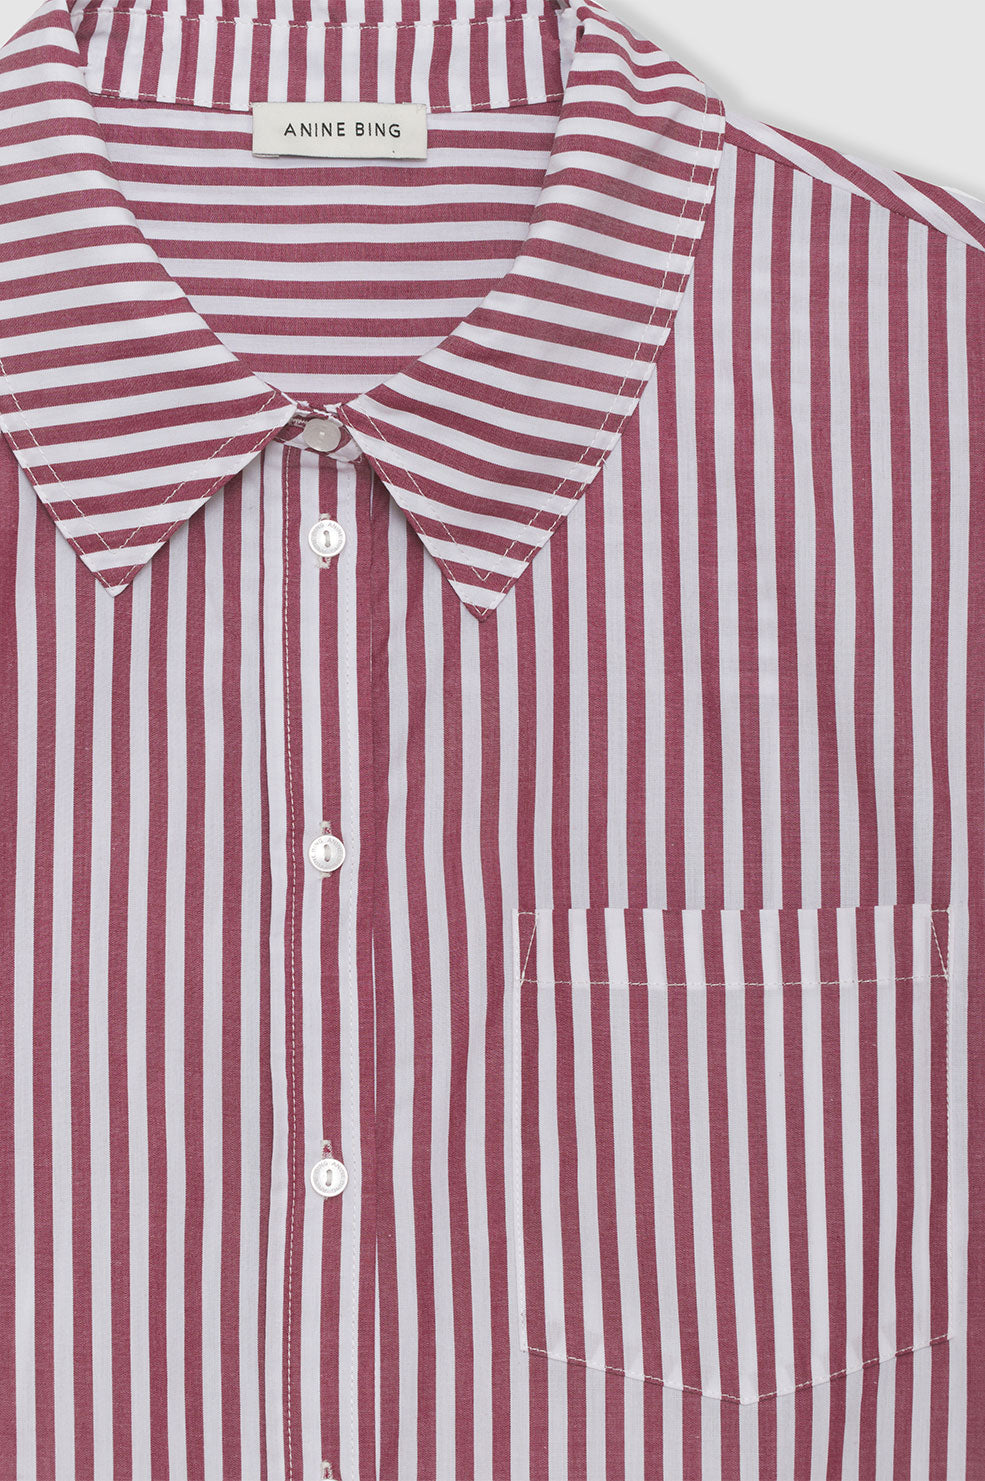 ANINE BING Mika Shirt - Red And White Stripe - Detail View